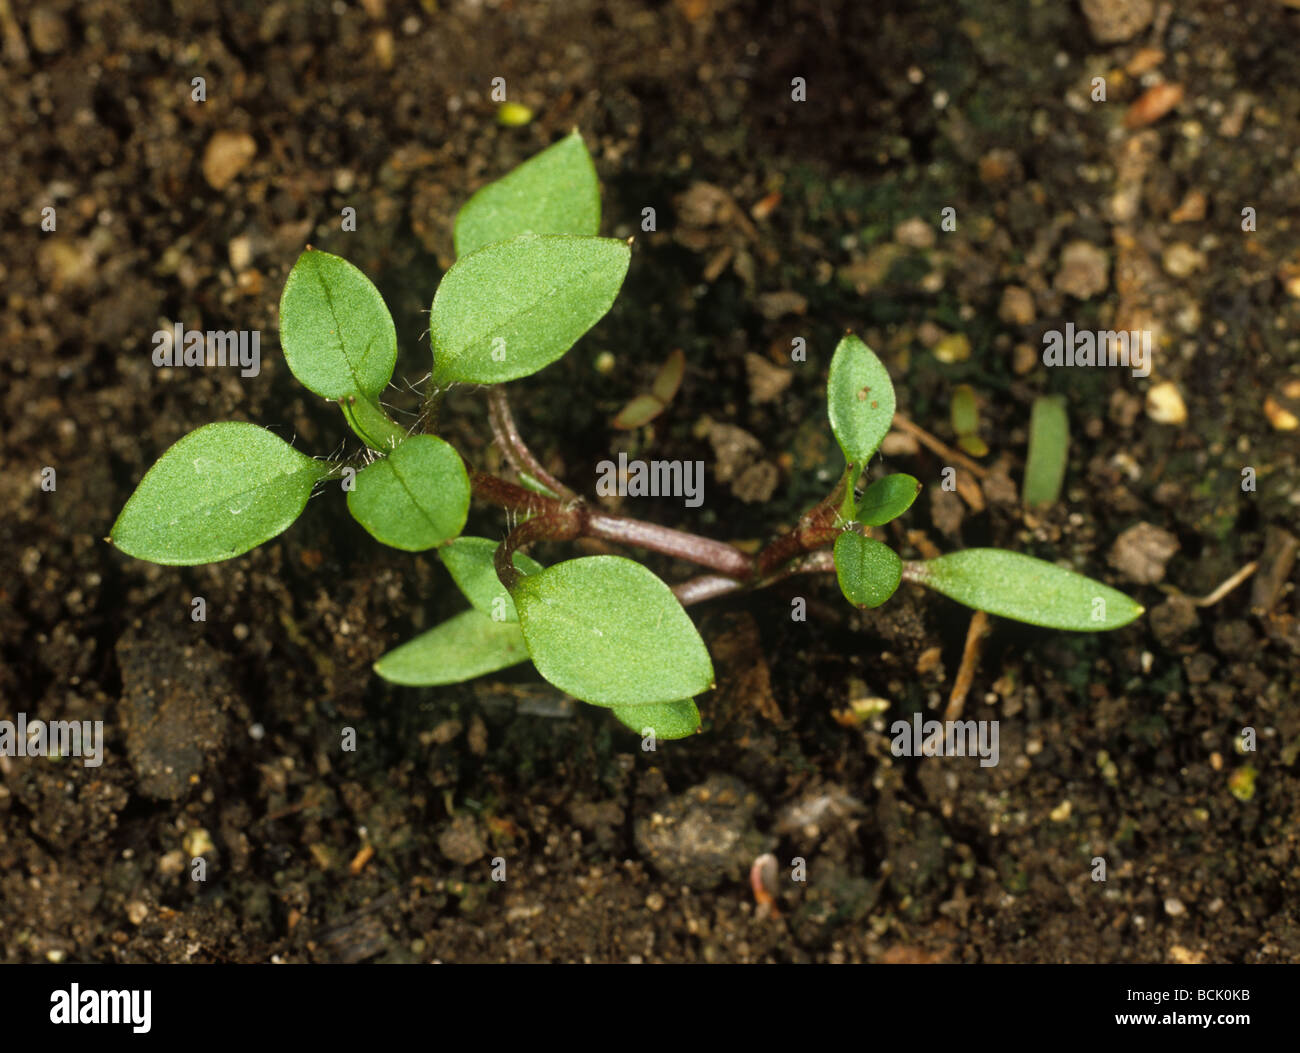 Chickweed Stellaria media young plant on soil background Stock Photo